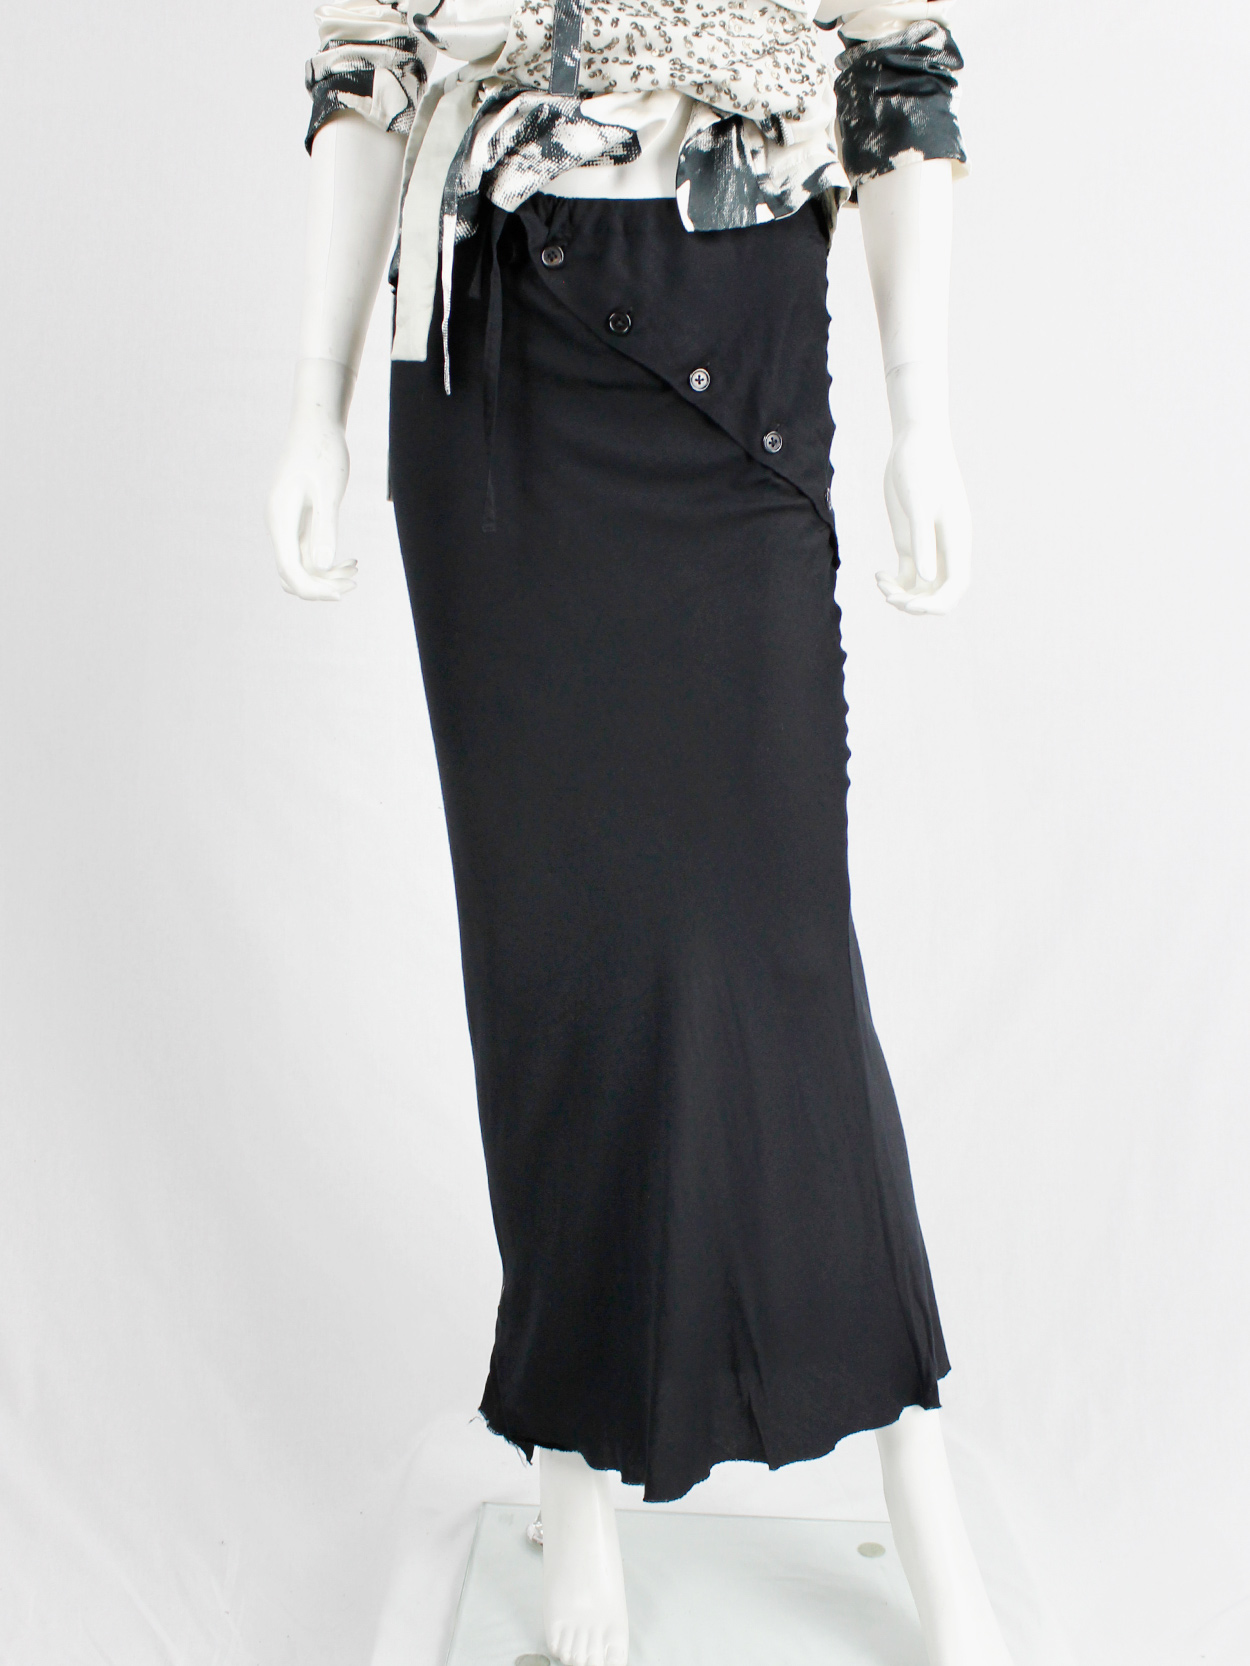 Ann Demeulemeester black maxi skirt with buttons twisting around it fall 2010 (19)